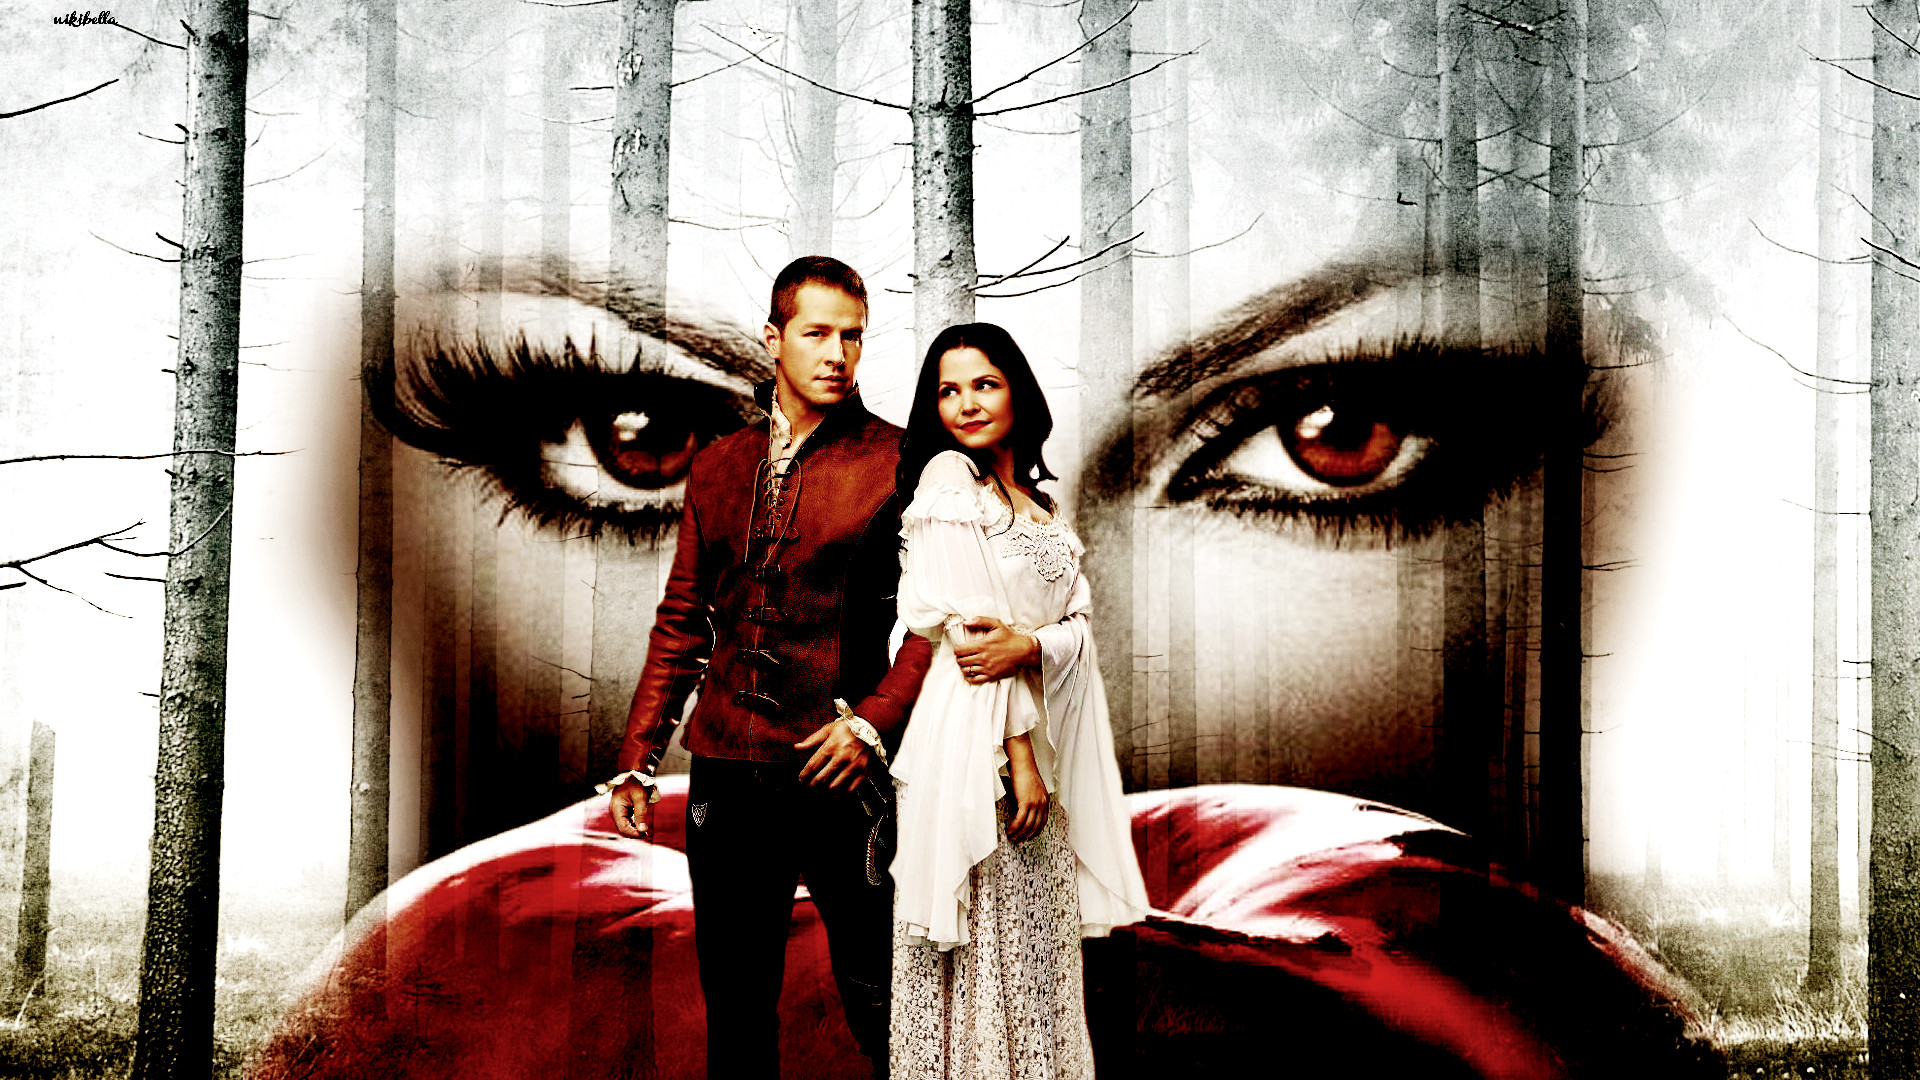 1920x1080 11 best OnCe UpoN A TiMe images on Pinterest | Once upon a time, Google  search and Christmas time